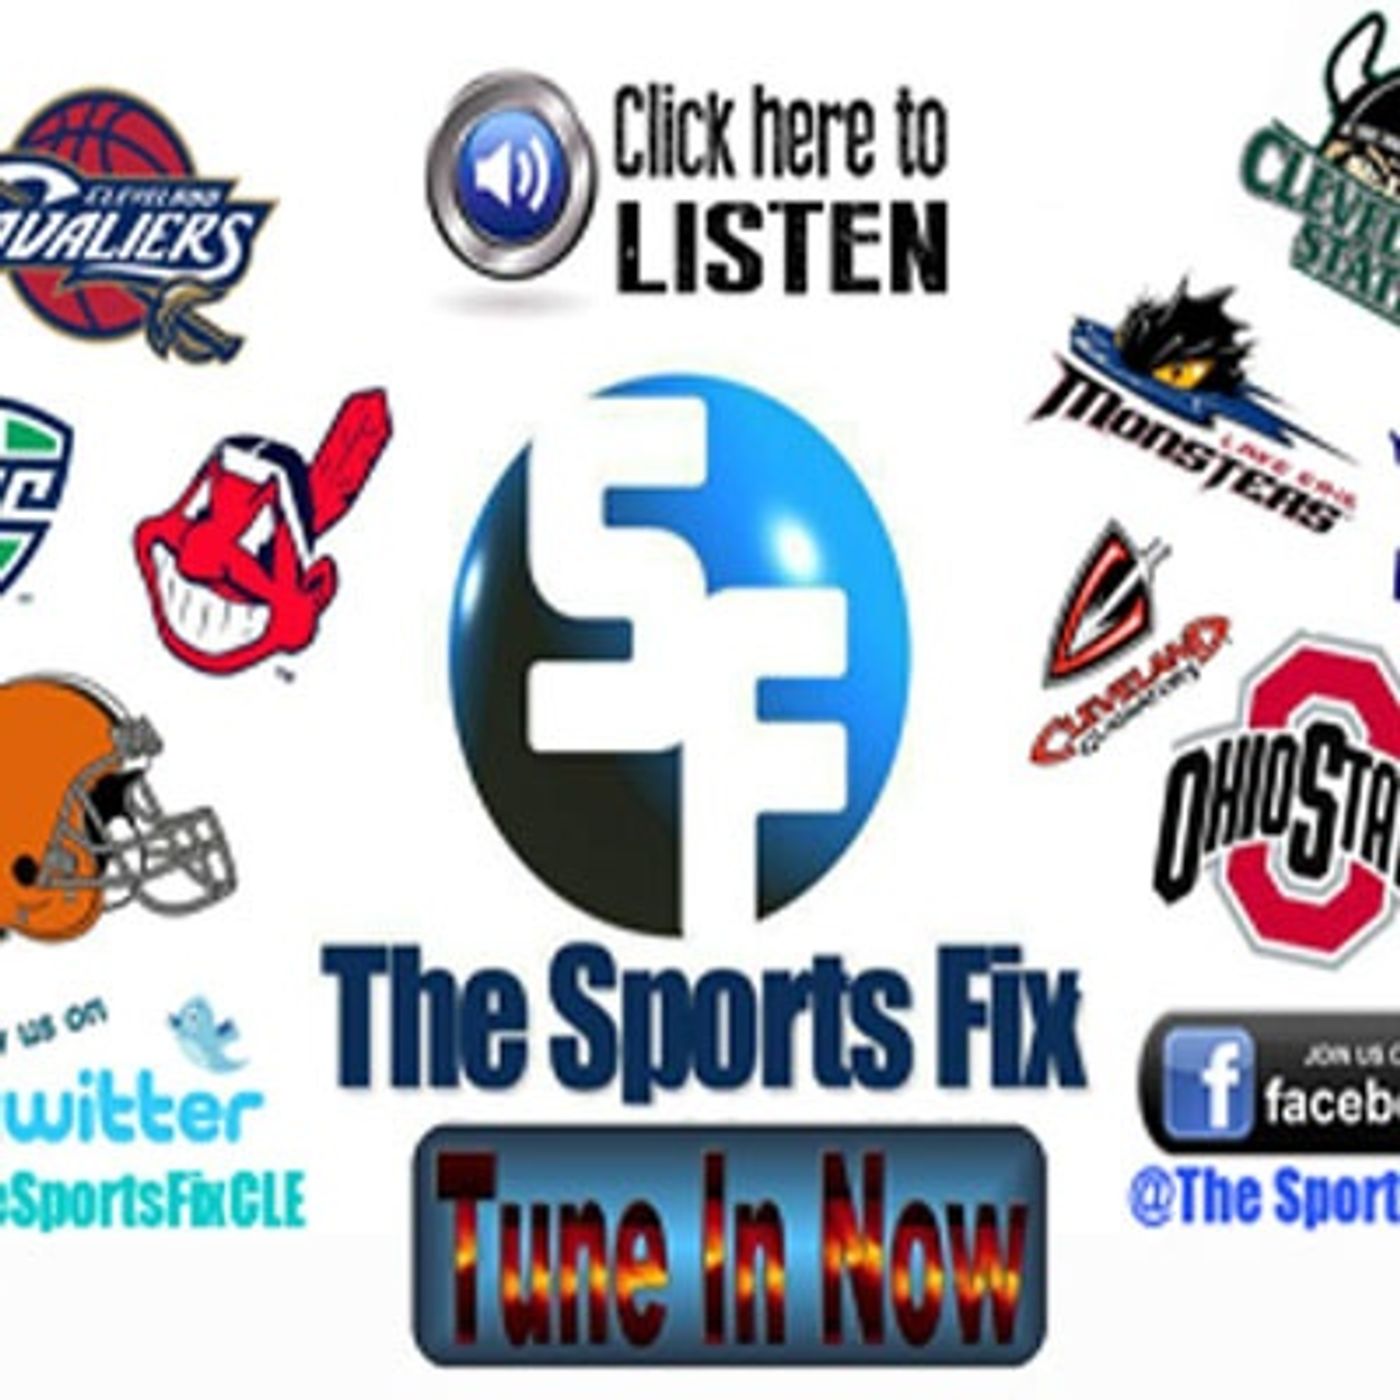 The Sports Fix - Tues May 5, 2015